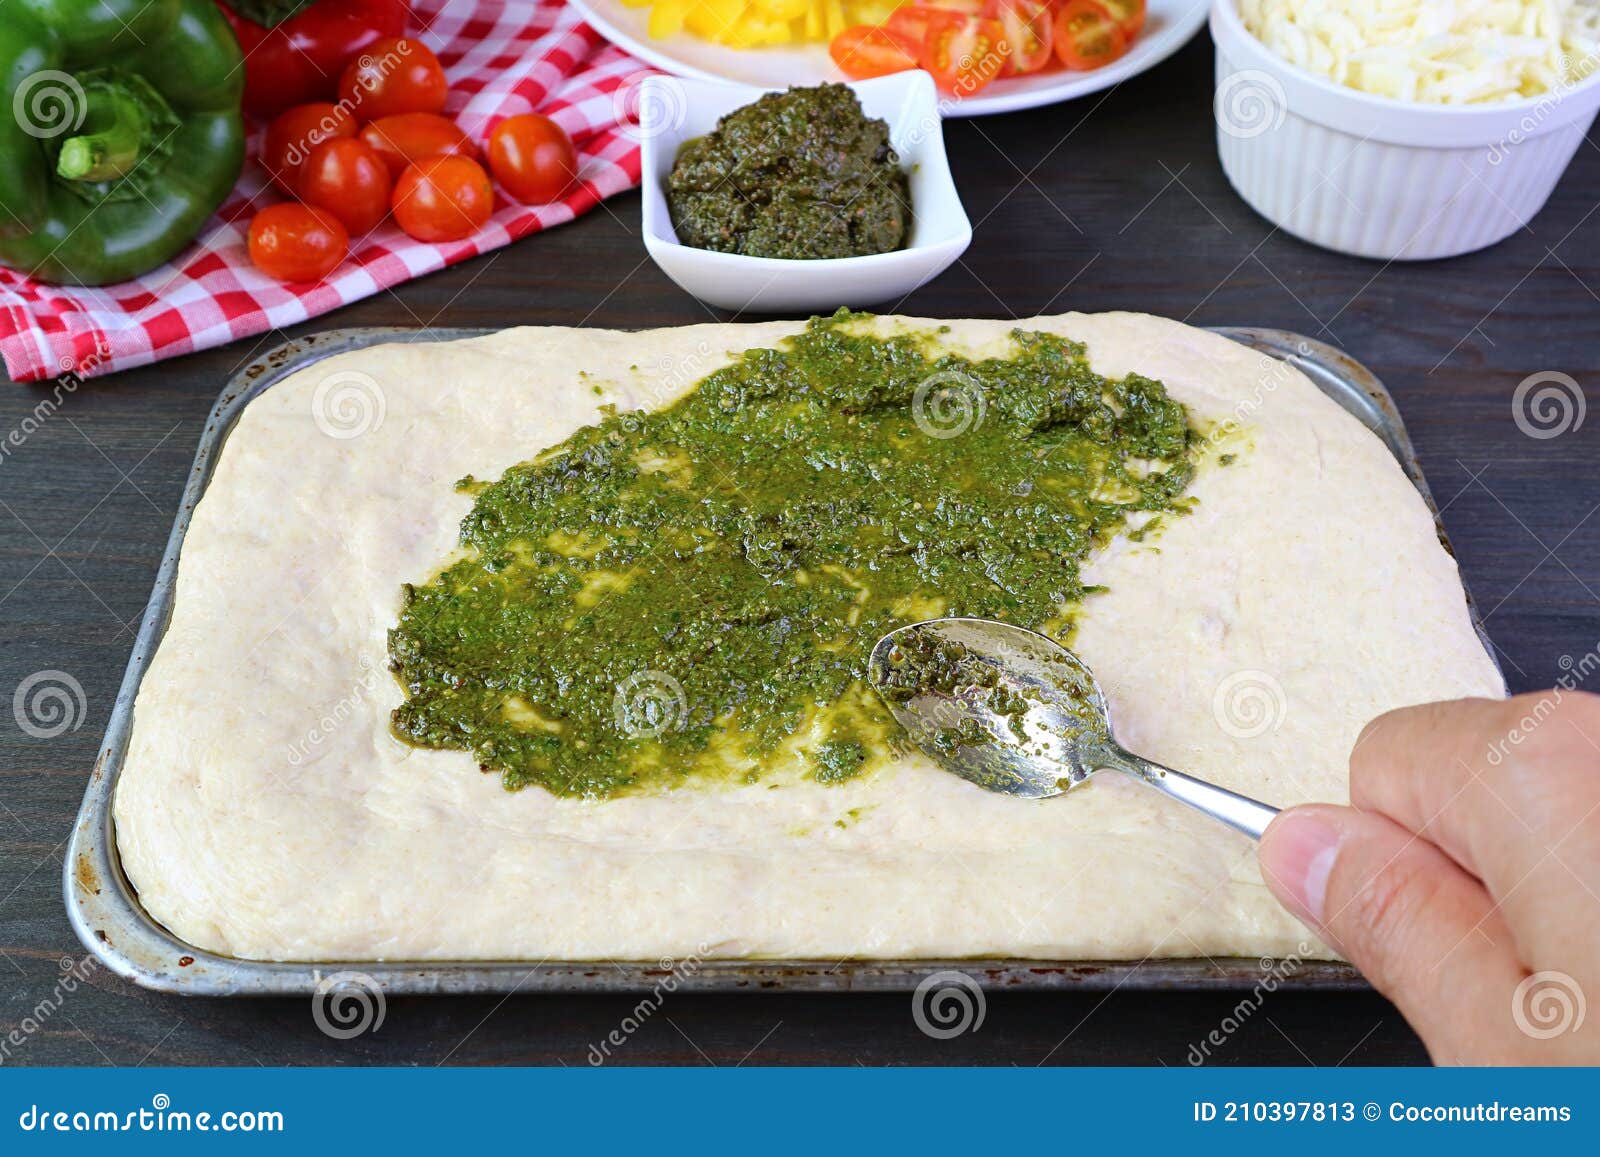 hand spreading pesto sauce on the pizza dough before baking